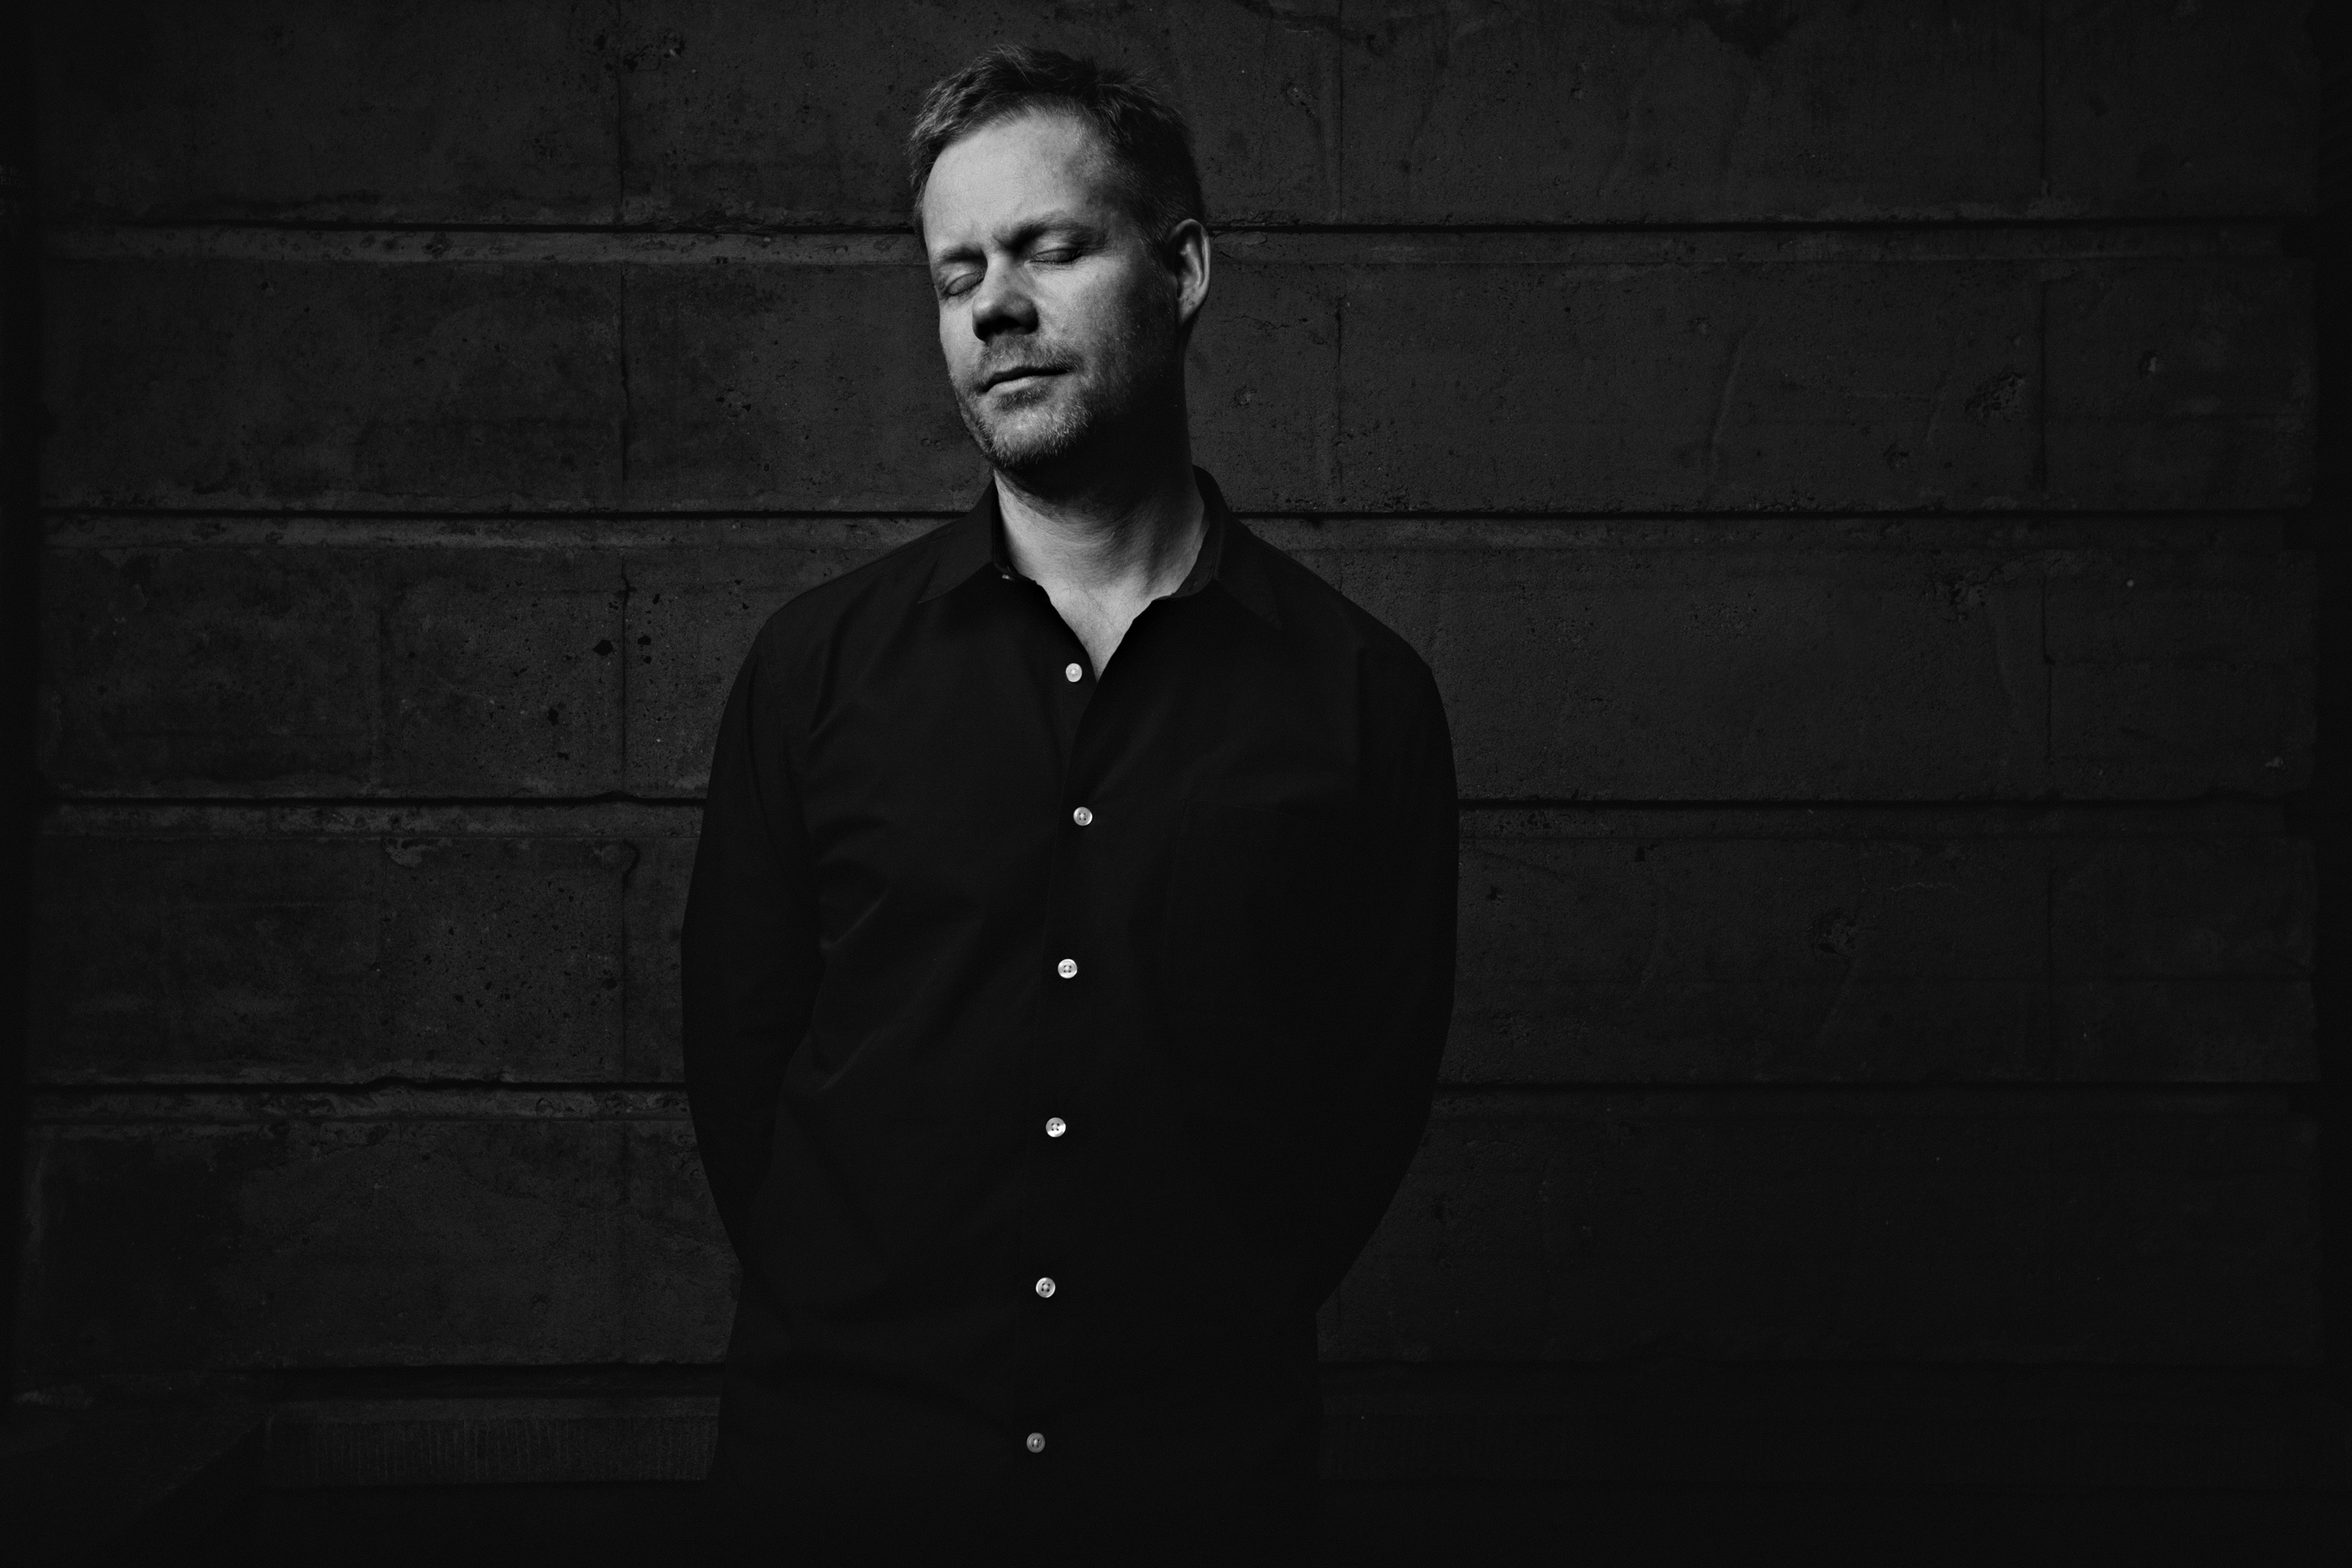 ALBUM REVIEW Max Richter’s “From Sleep” SECOND INVERSION